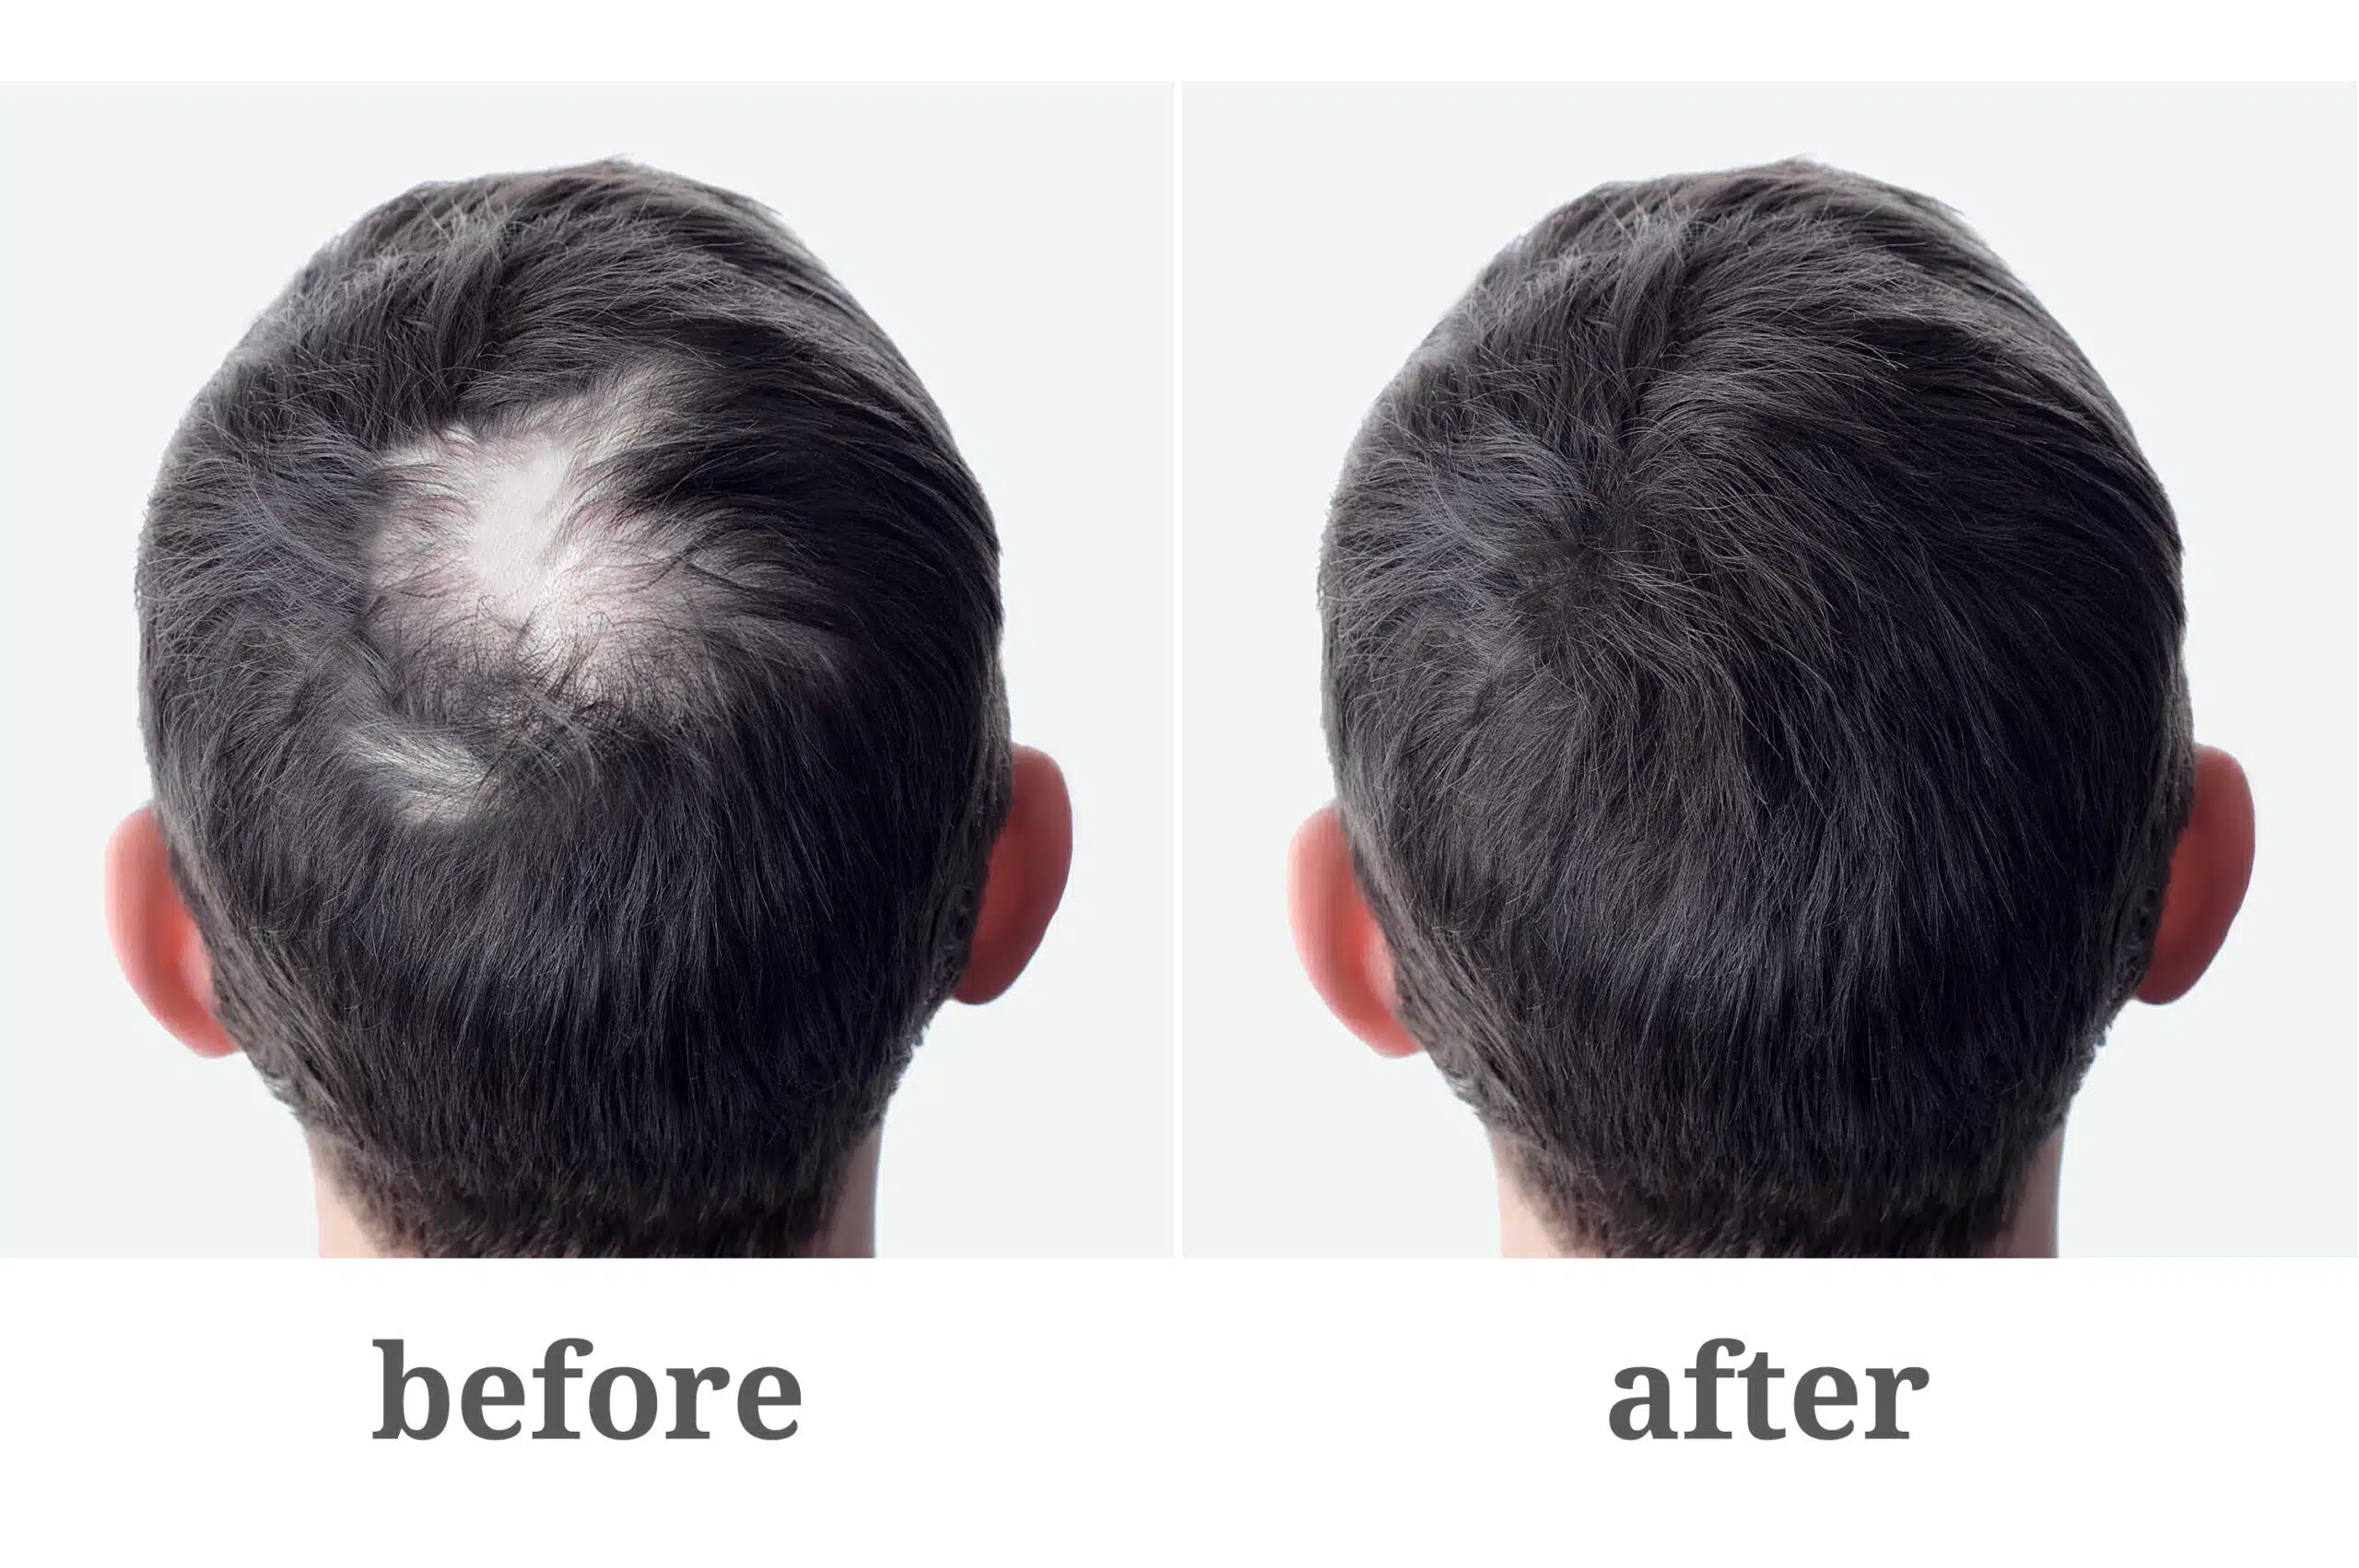 What is the best cure for hair loss or hair loss treatment?